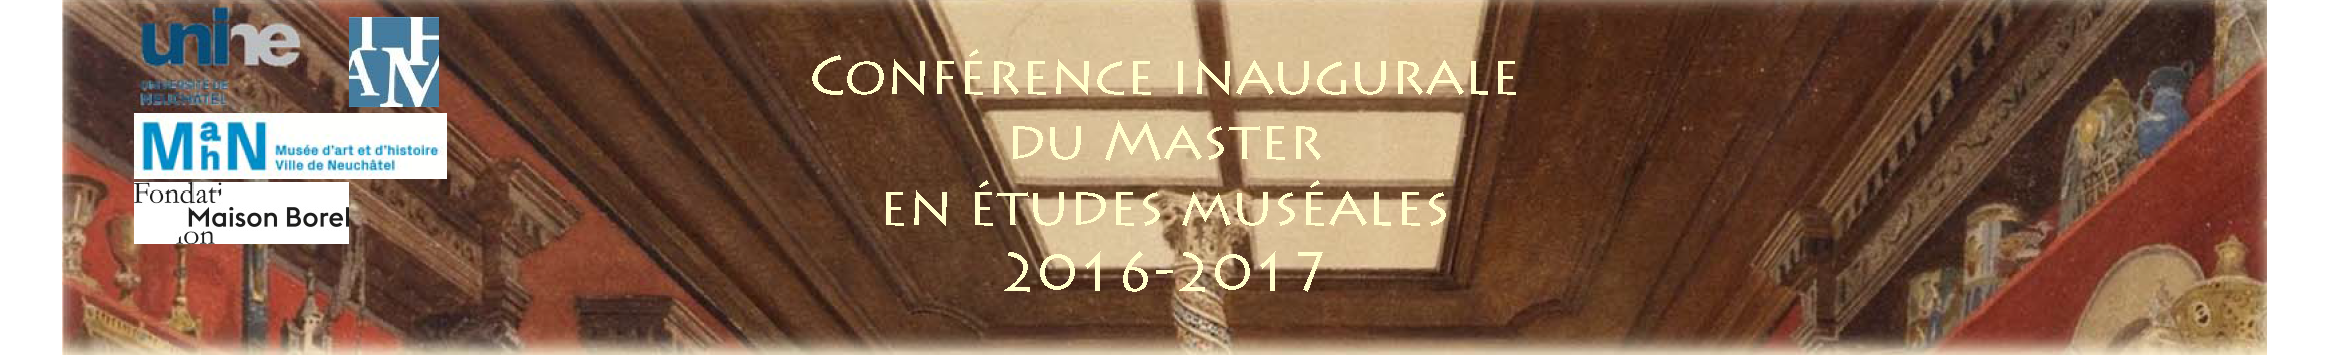 Conférence_inaugurale_MA_MS_2016-2017_vignette.png